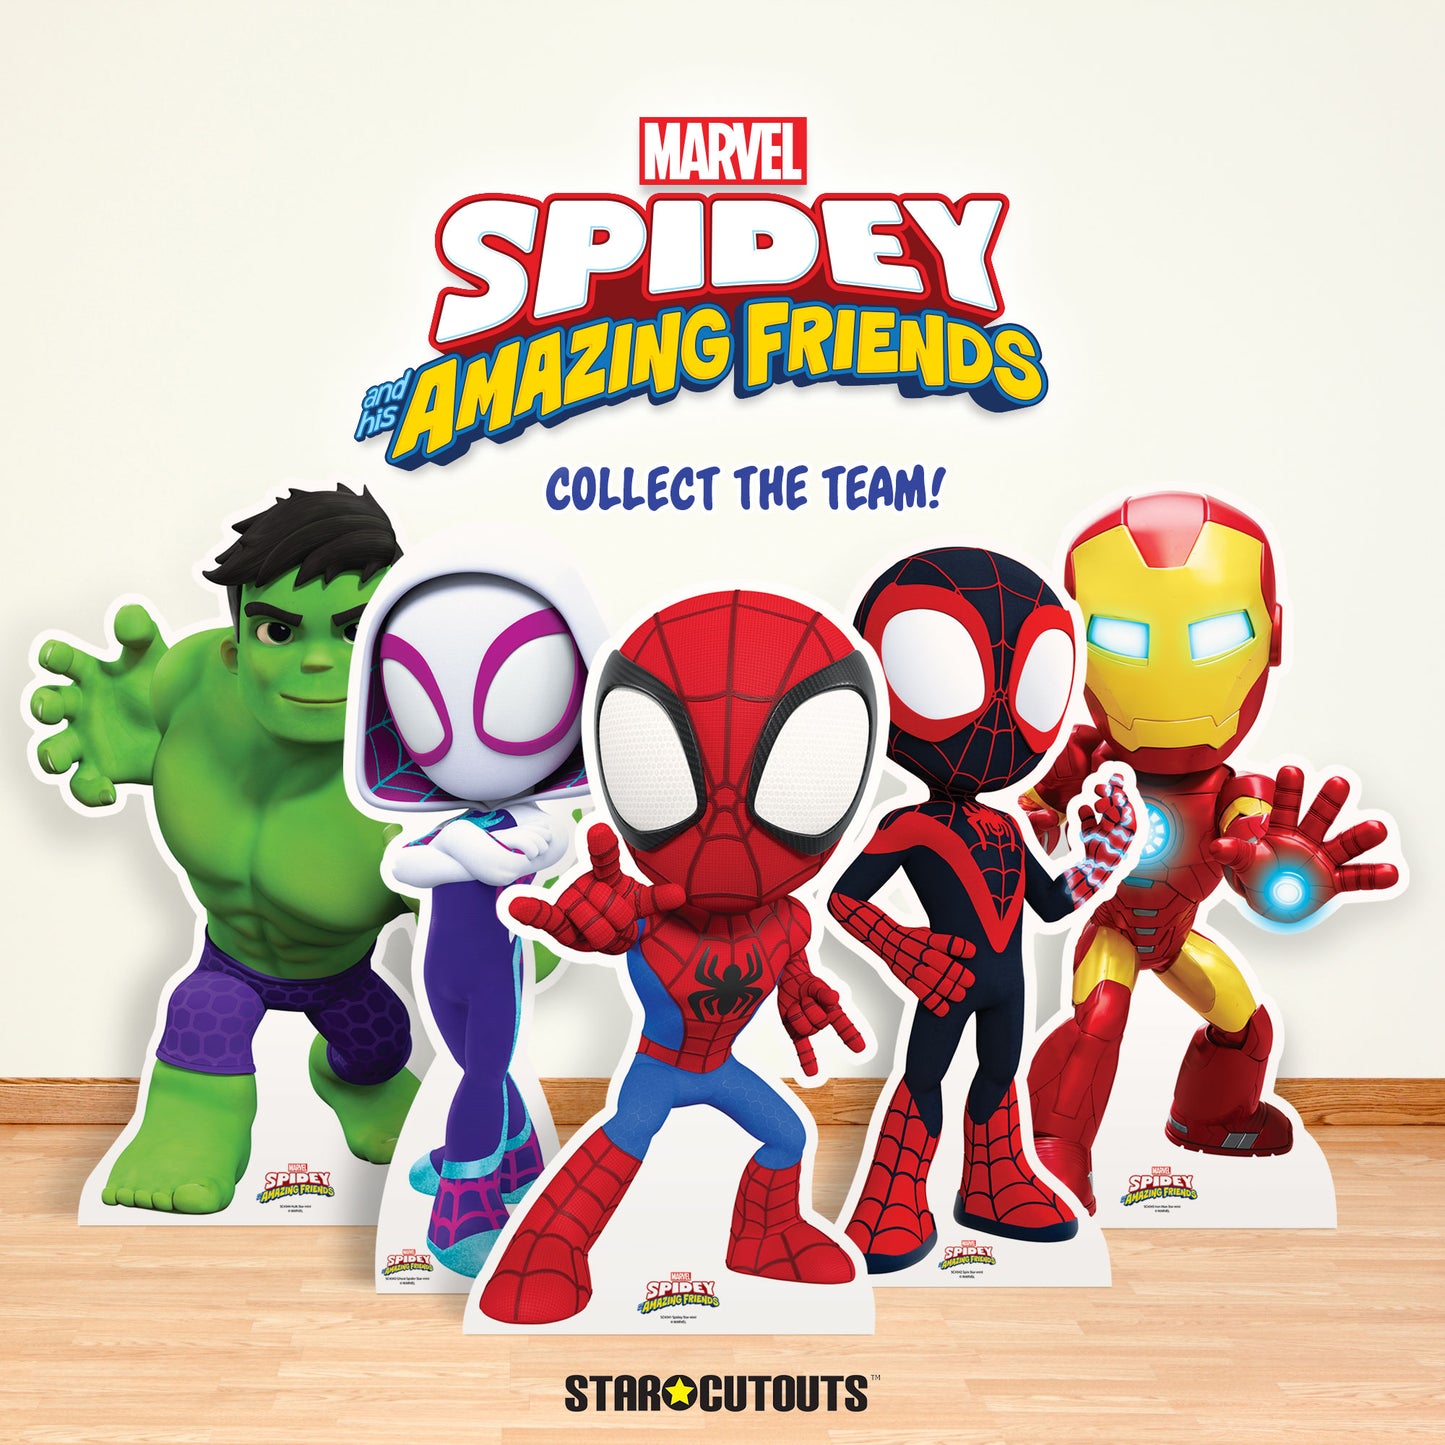 SC4343 Ghost Spider Spidey and His Amazing Friends Cardboard Cutout Height 95cm